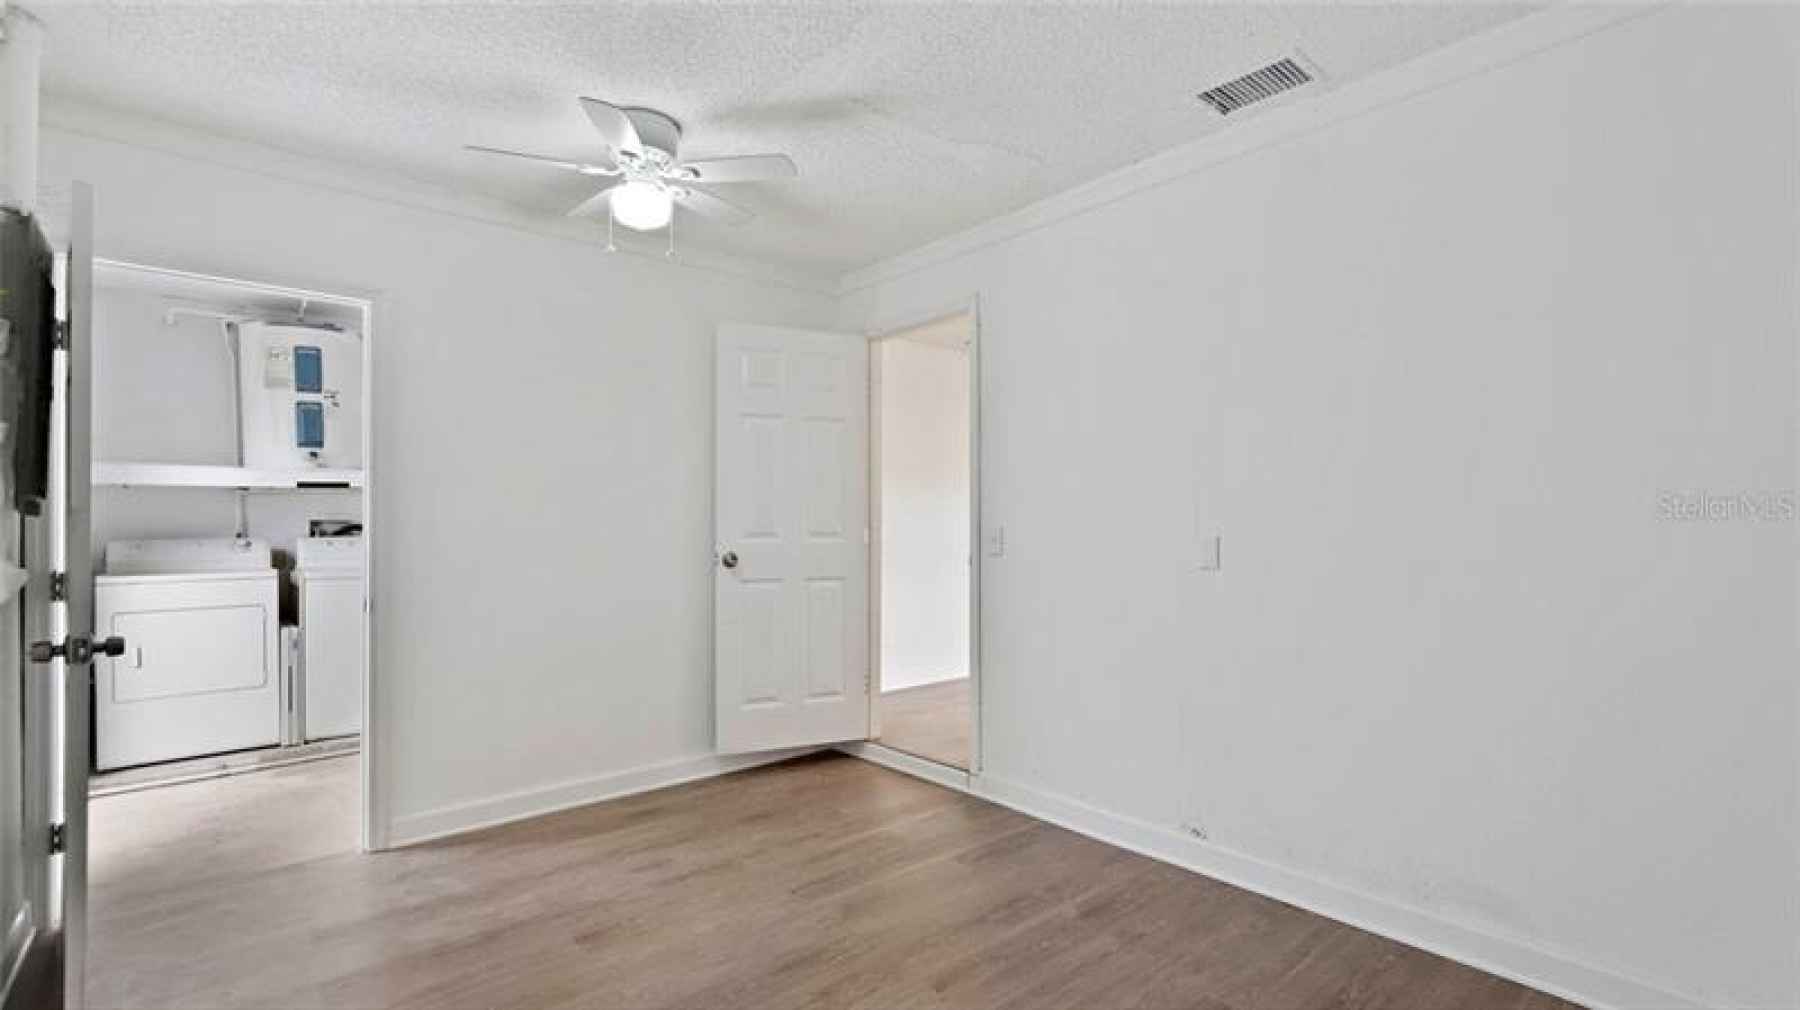 Bonus room/Office or possible 3rd bedroom.   Looking into separated laundry room.